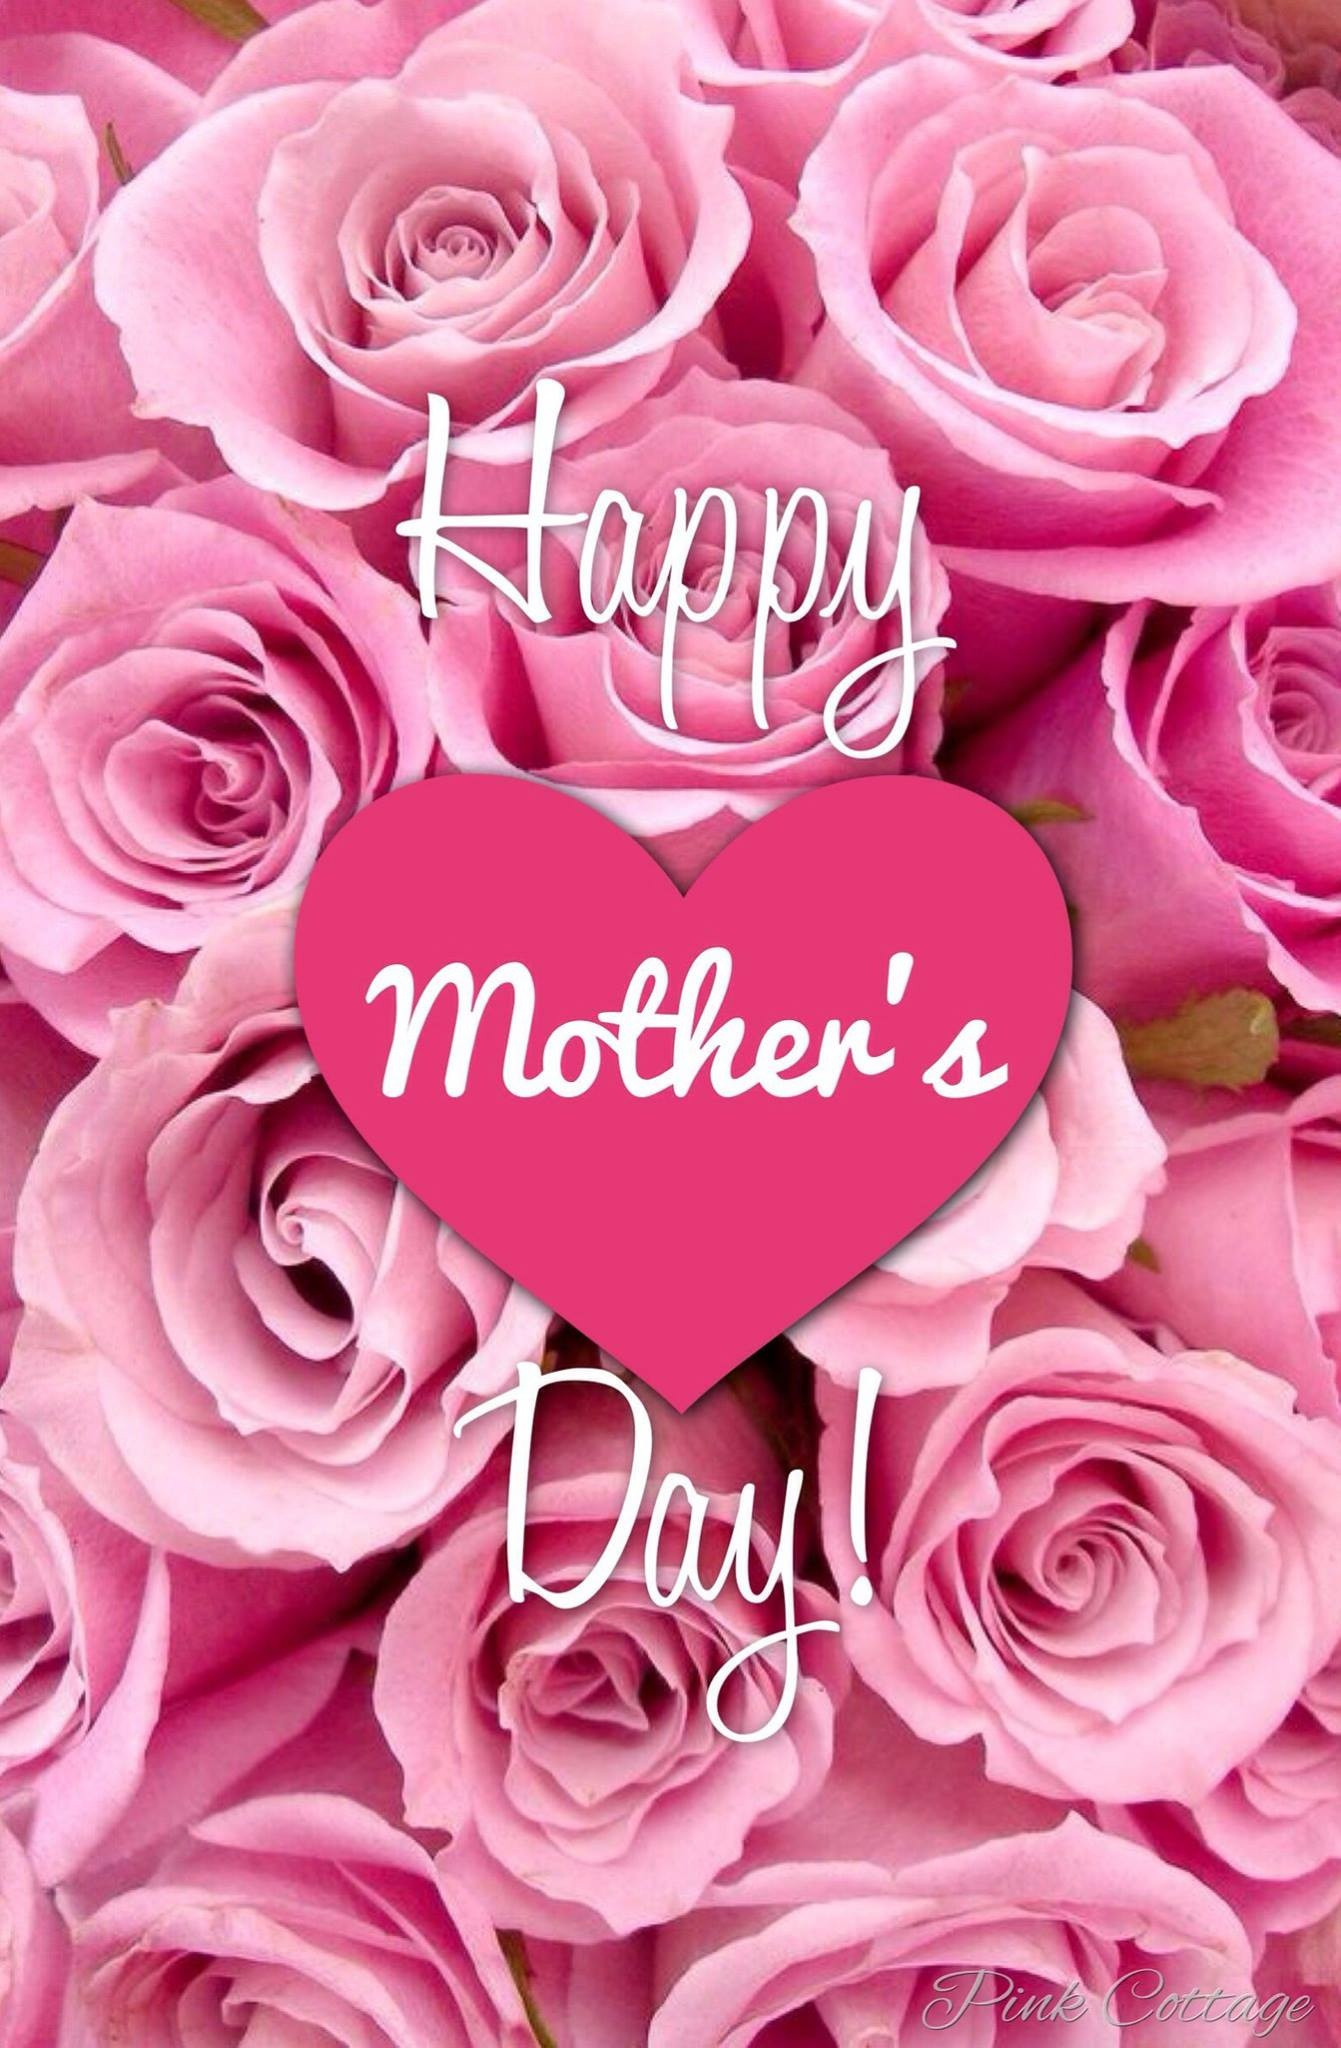 Pinterest Mothers Day Quotes
 Pinterest Mothers Day Quotes QuotesGram